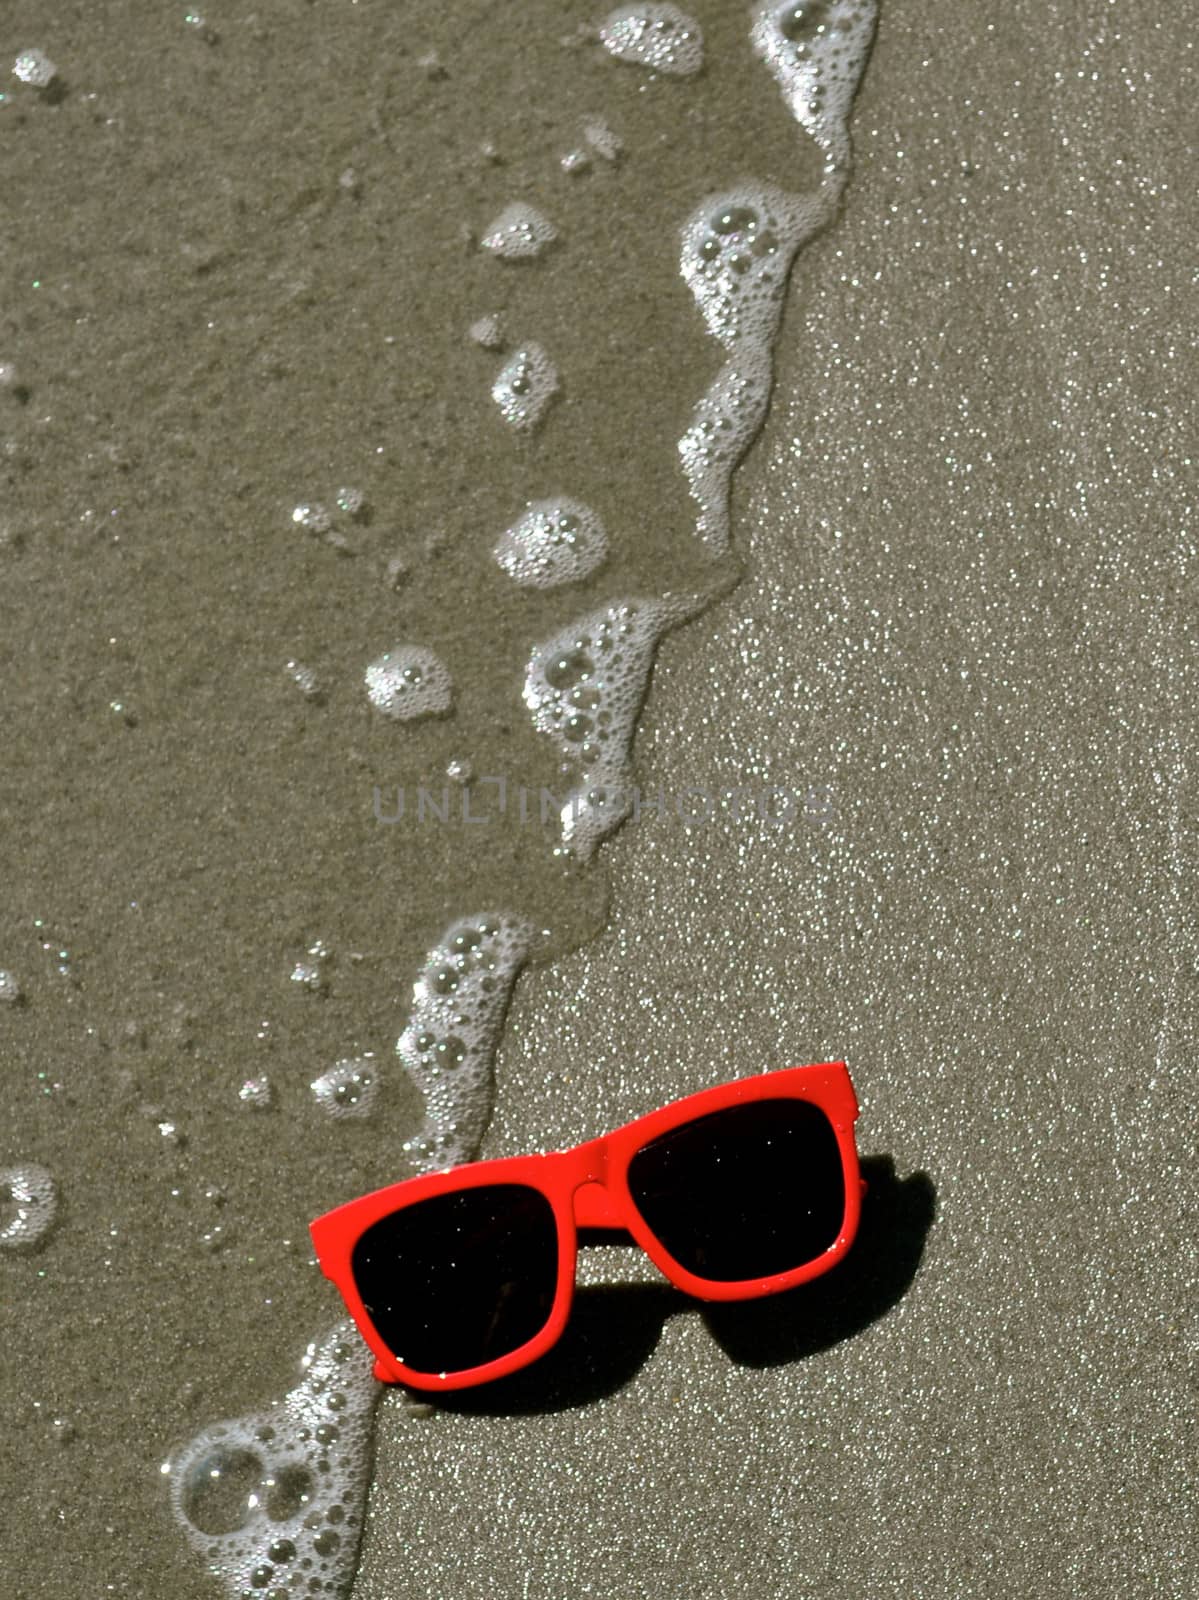 In the Sand - Sunglasses